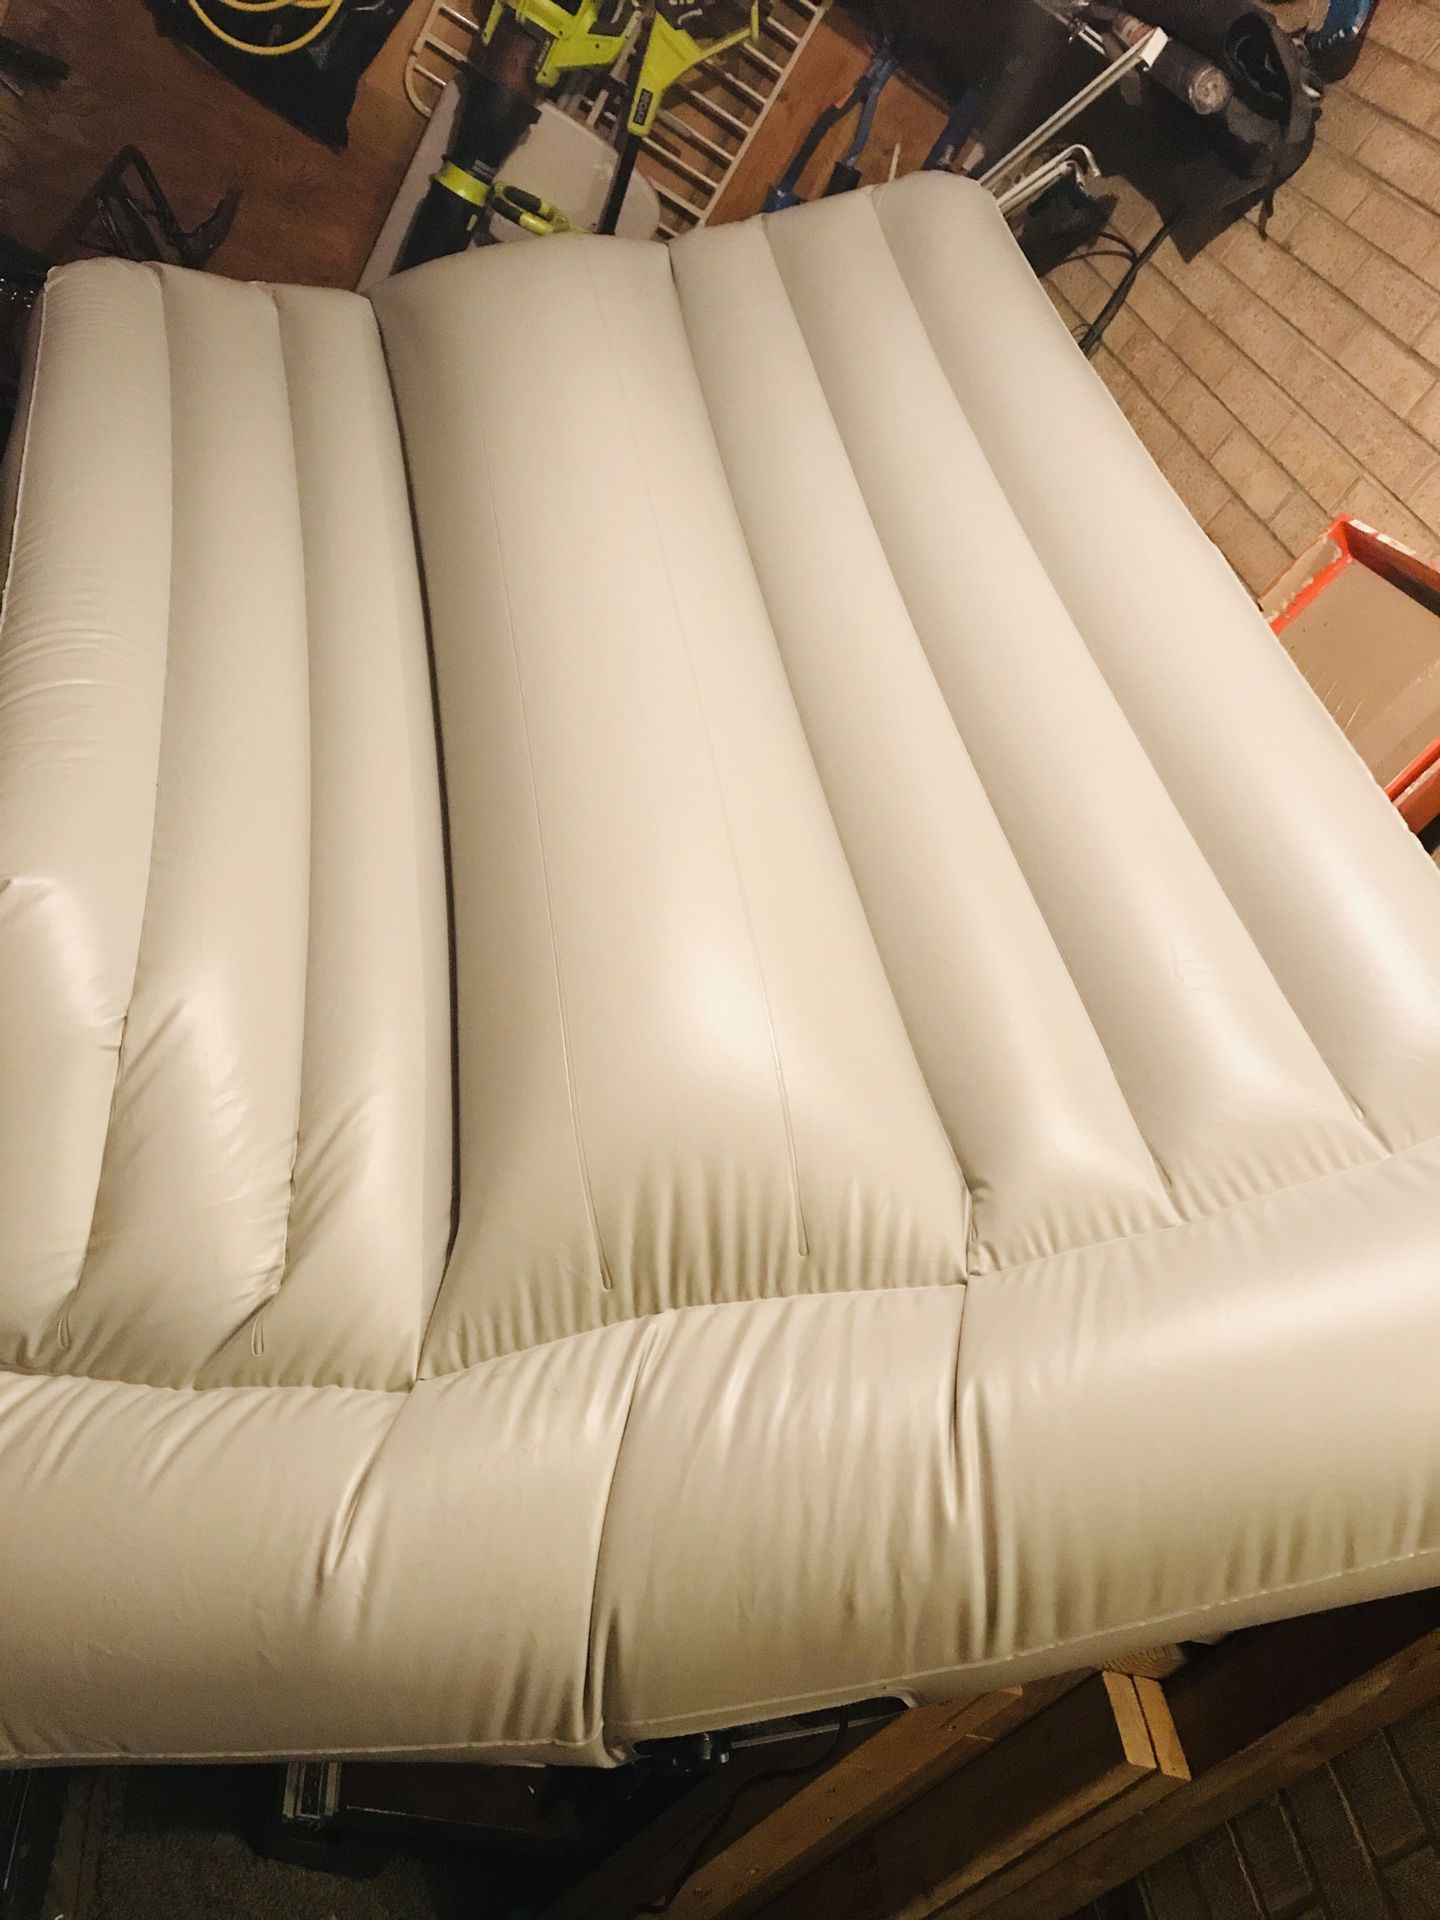 Inflatable mattress with electric air pump